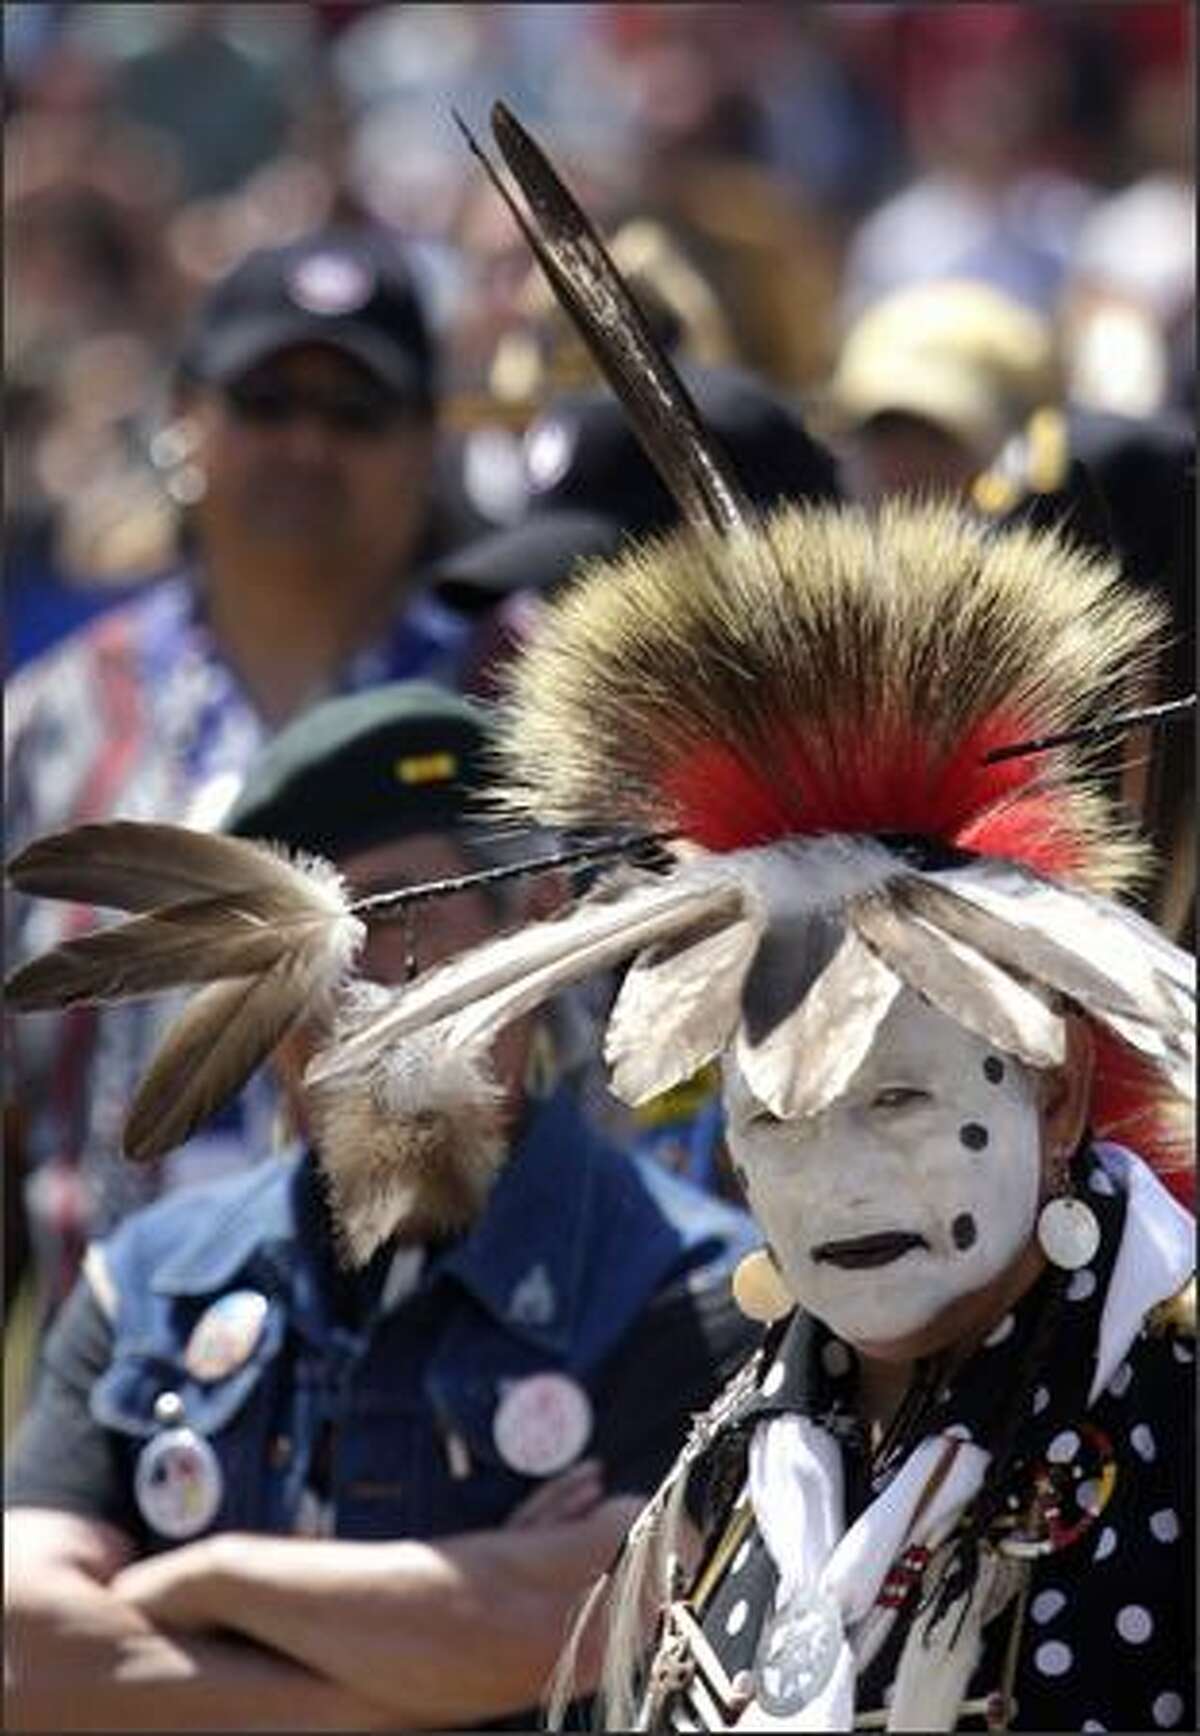 Mickey Mason, of the Caddo Nation, from Binger, Okla. stands with other military veterans as they are honored during the 2008 Seafair Indian Days Pow-Wow in in Seattle Saturday, July 18, 2008.